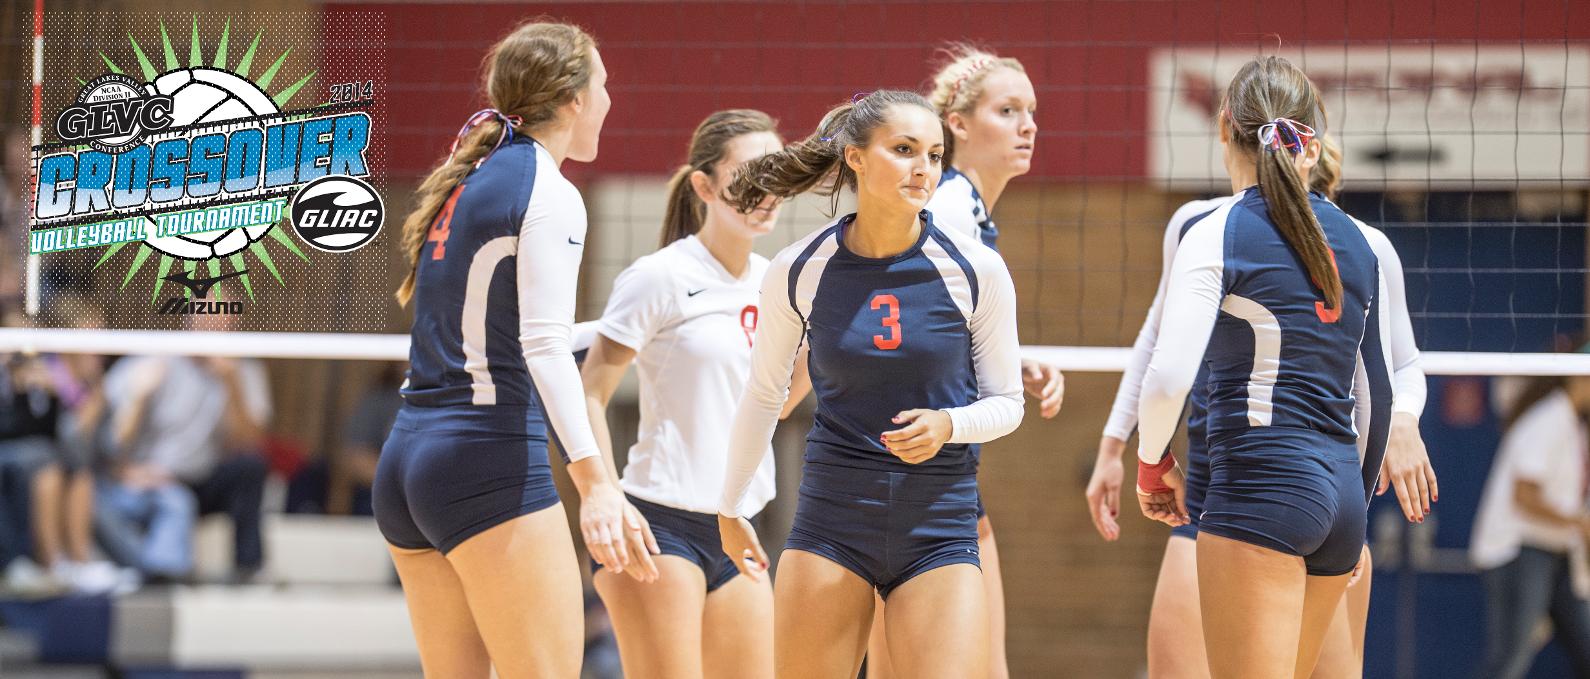 Volleyball to Make Weekend Trip to Seventh GLIAC/GLVC Crossover Tournament